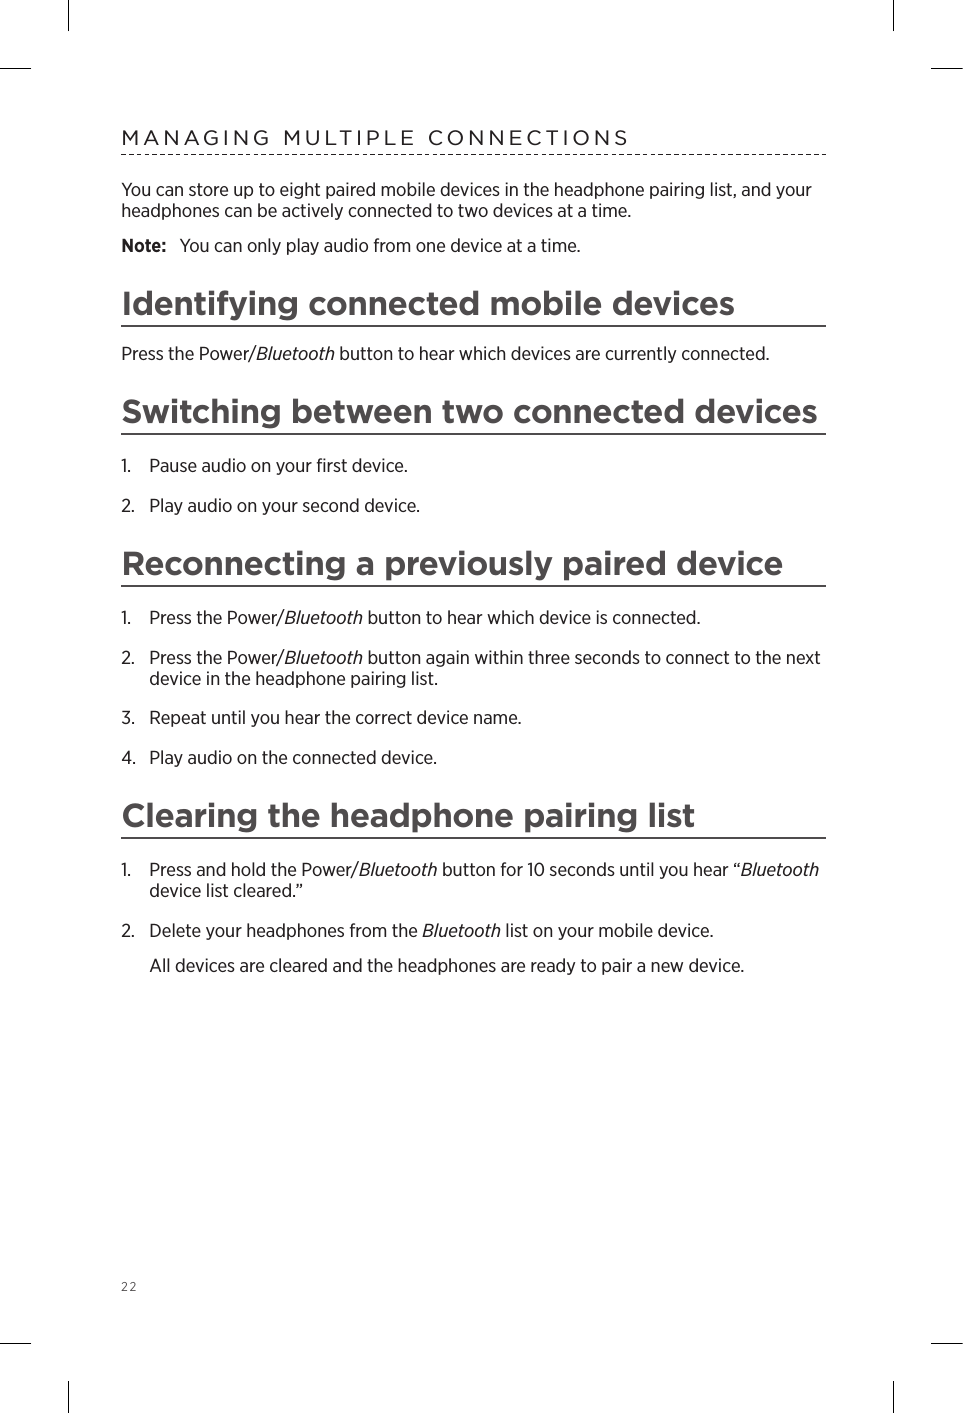 22MANAGING MULTIPLE CONNECTIONSYou can store up to eight paired mobile devices in the headphone pairing list, and your  headphones can  be actively connected to two devices at a time. Note:  You can only play audio from one device at a time. Identifying connected mobile devicesPress the Power/Bluetooth button to hear which devices are currently  connected.Switching between two connected devices1.  Pause audio on your ﬁrst device.2.  Play audio on your second device.Reconnecting a previously paired device1.  Press the Power/Bluetooth button to hear which device is connected.2.   Press the Power/Bluetooth button again within three seconds to connect to the next device in the headphone pairing list. 3.  Repeat until you hear the correct device name.4.  Play audio on the connected device. Clearing the headphone pairing list1.  Press and hold the Power/Bluetooth button for 10 seconds until you hear “Bluetooth device list cleared.”2.  Delete your headphones from the Bluetooth list on your mobile device.All devices are cleared and the headphones are ready to pair a new device.